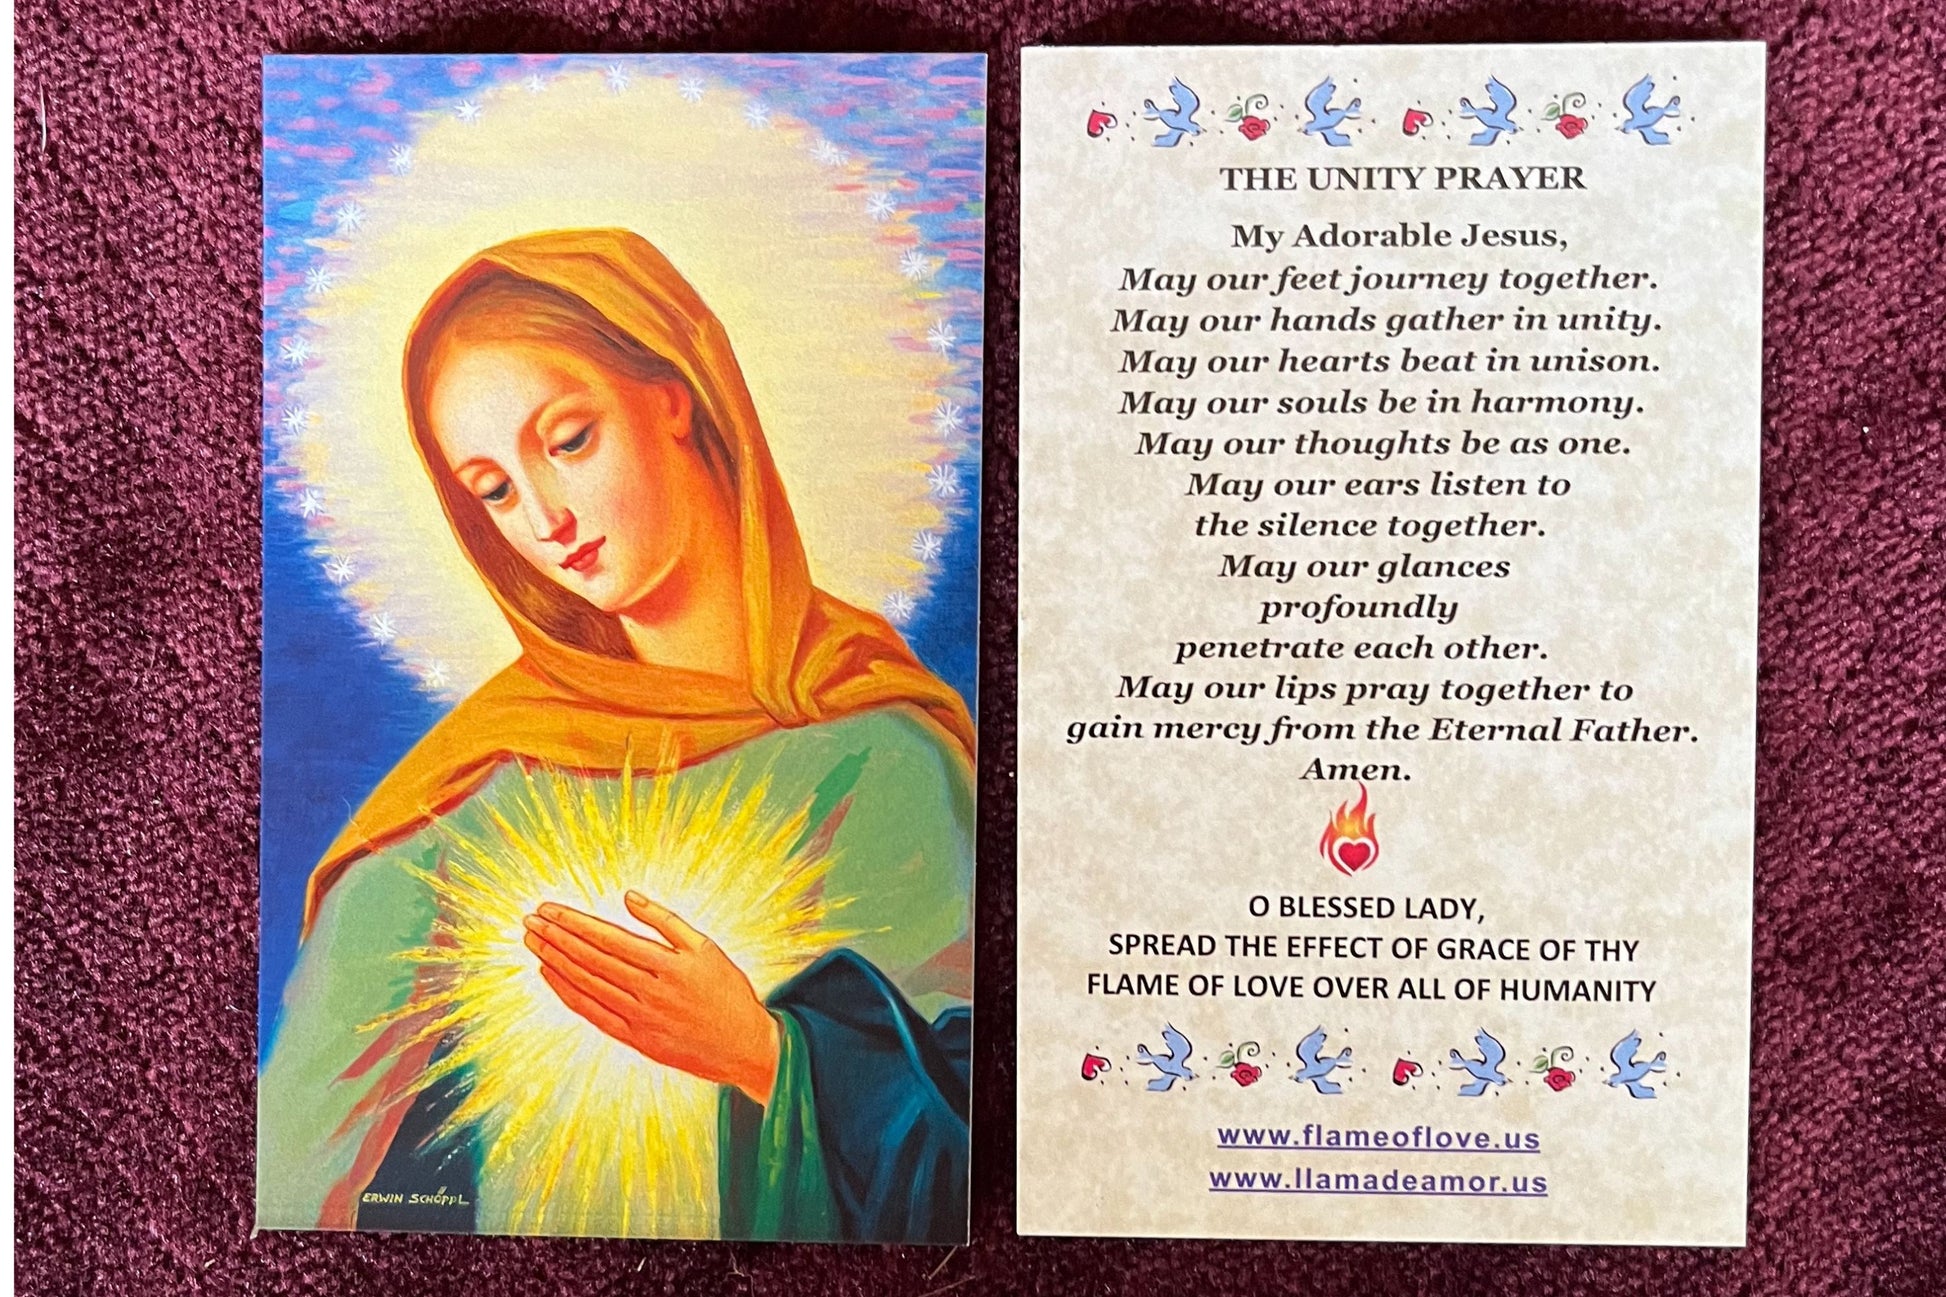 Flame of Love Unity Prayer Card Packages - Bob and Penny Lord